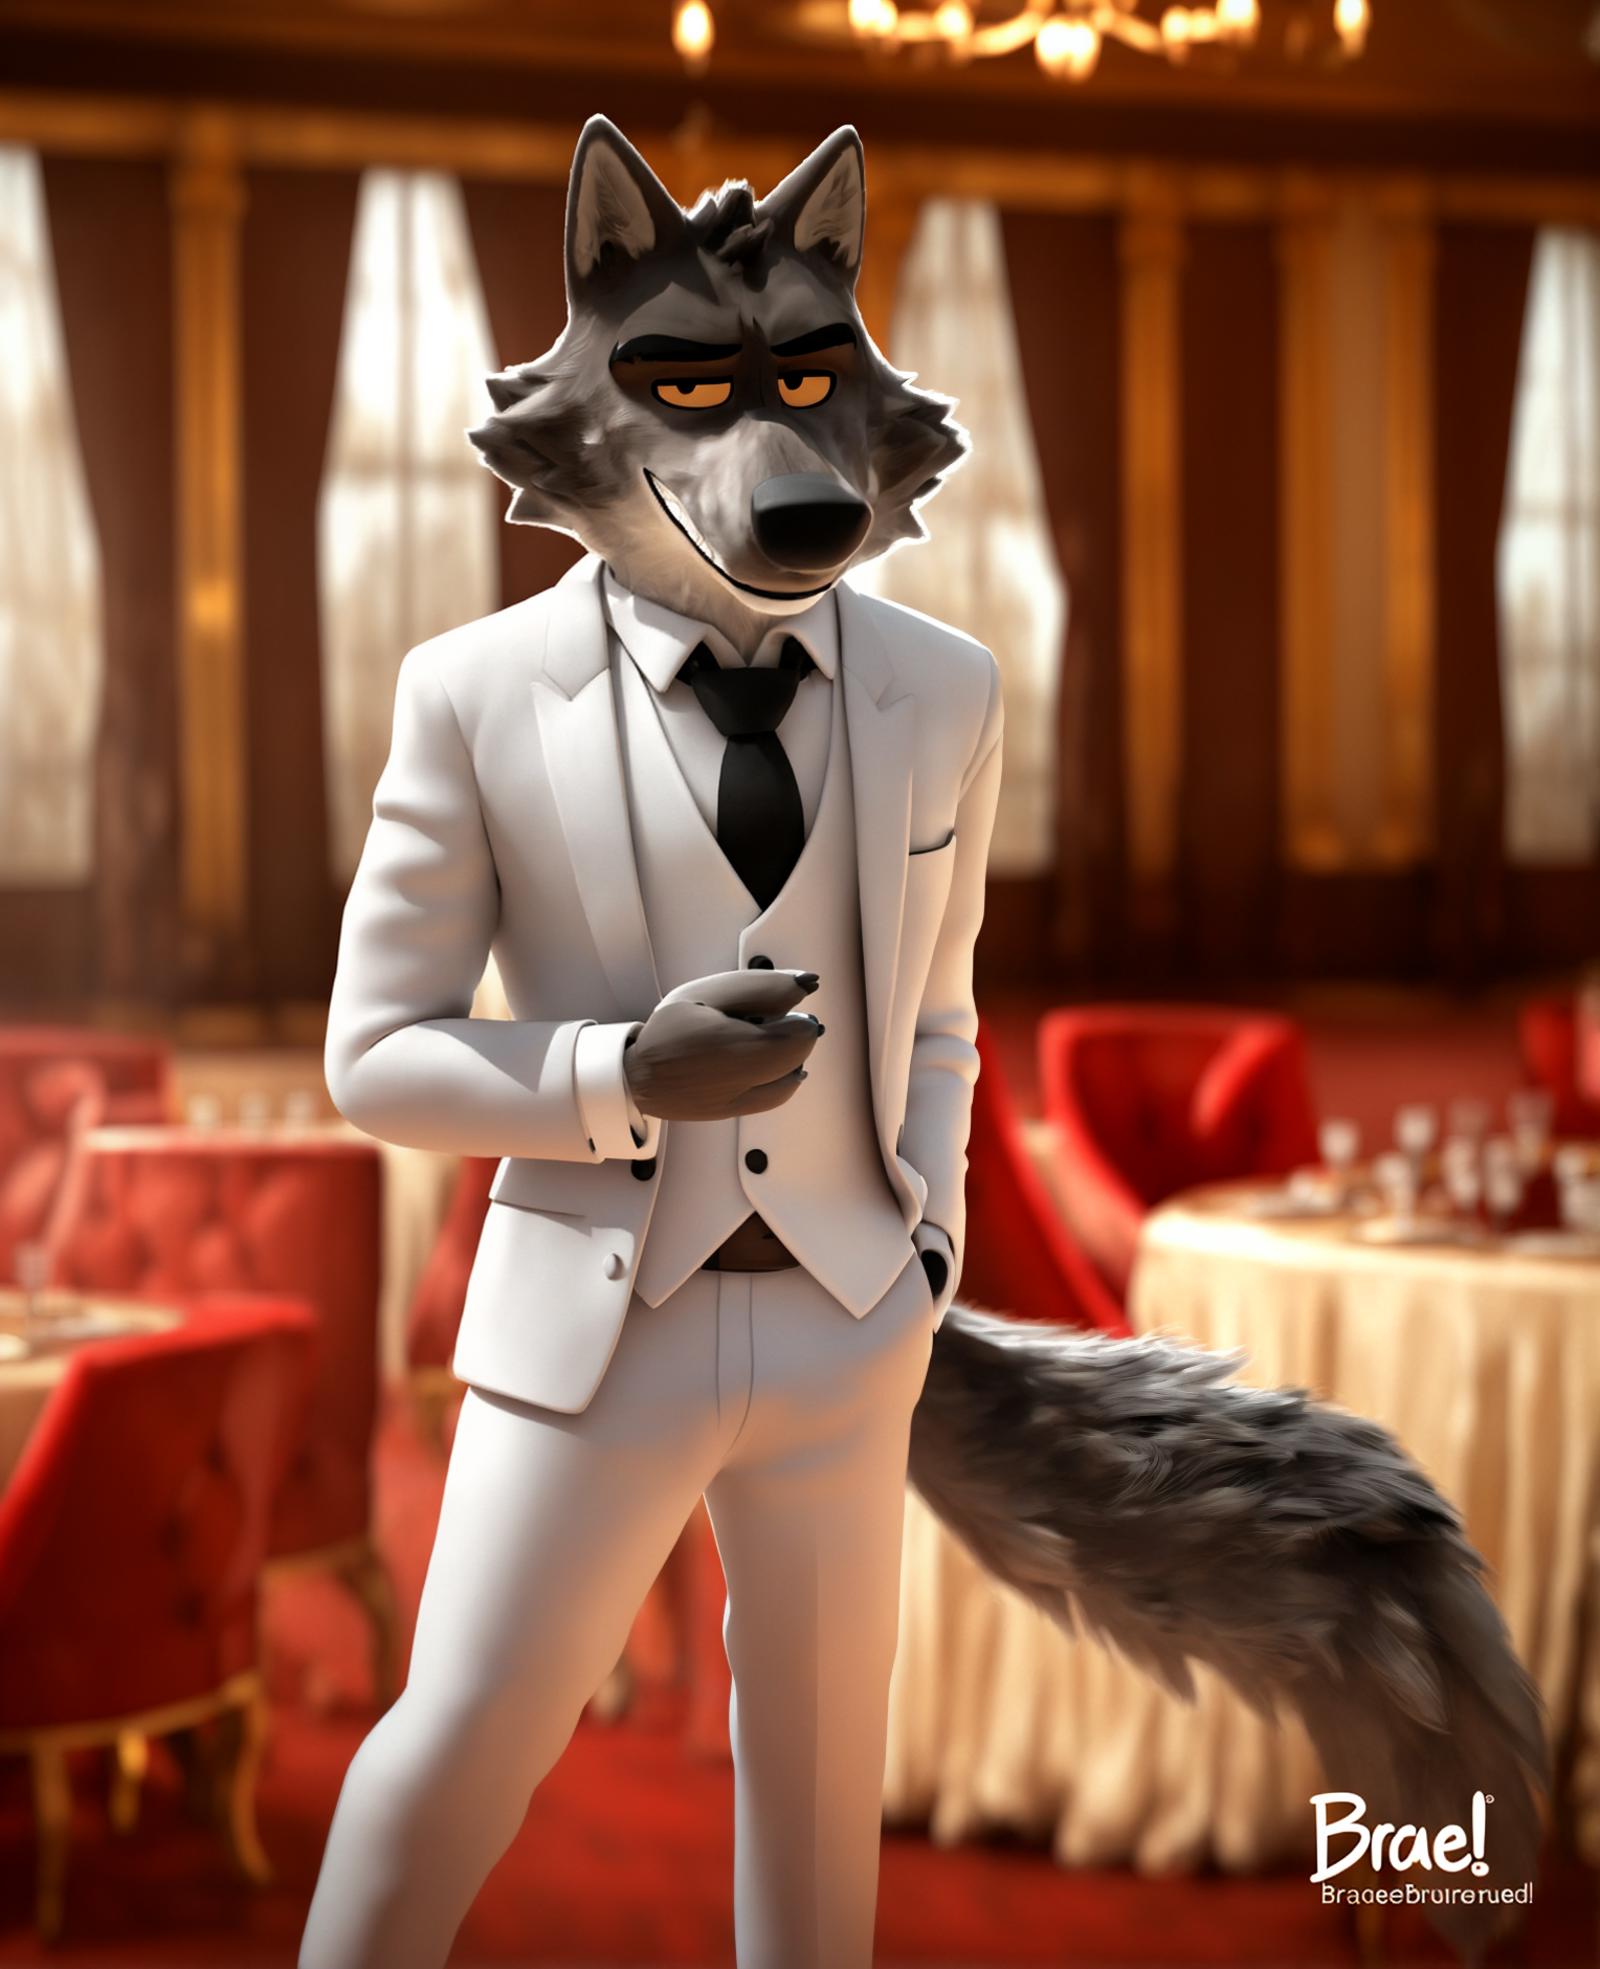 Mr Wolf (Movie Accurate) image by daguerre